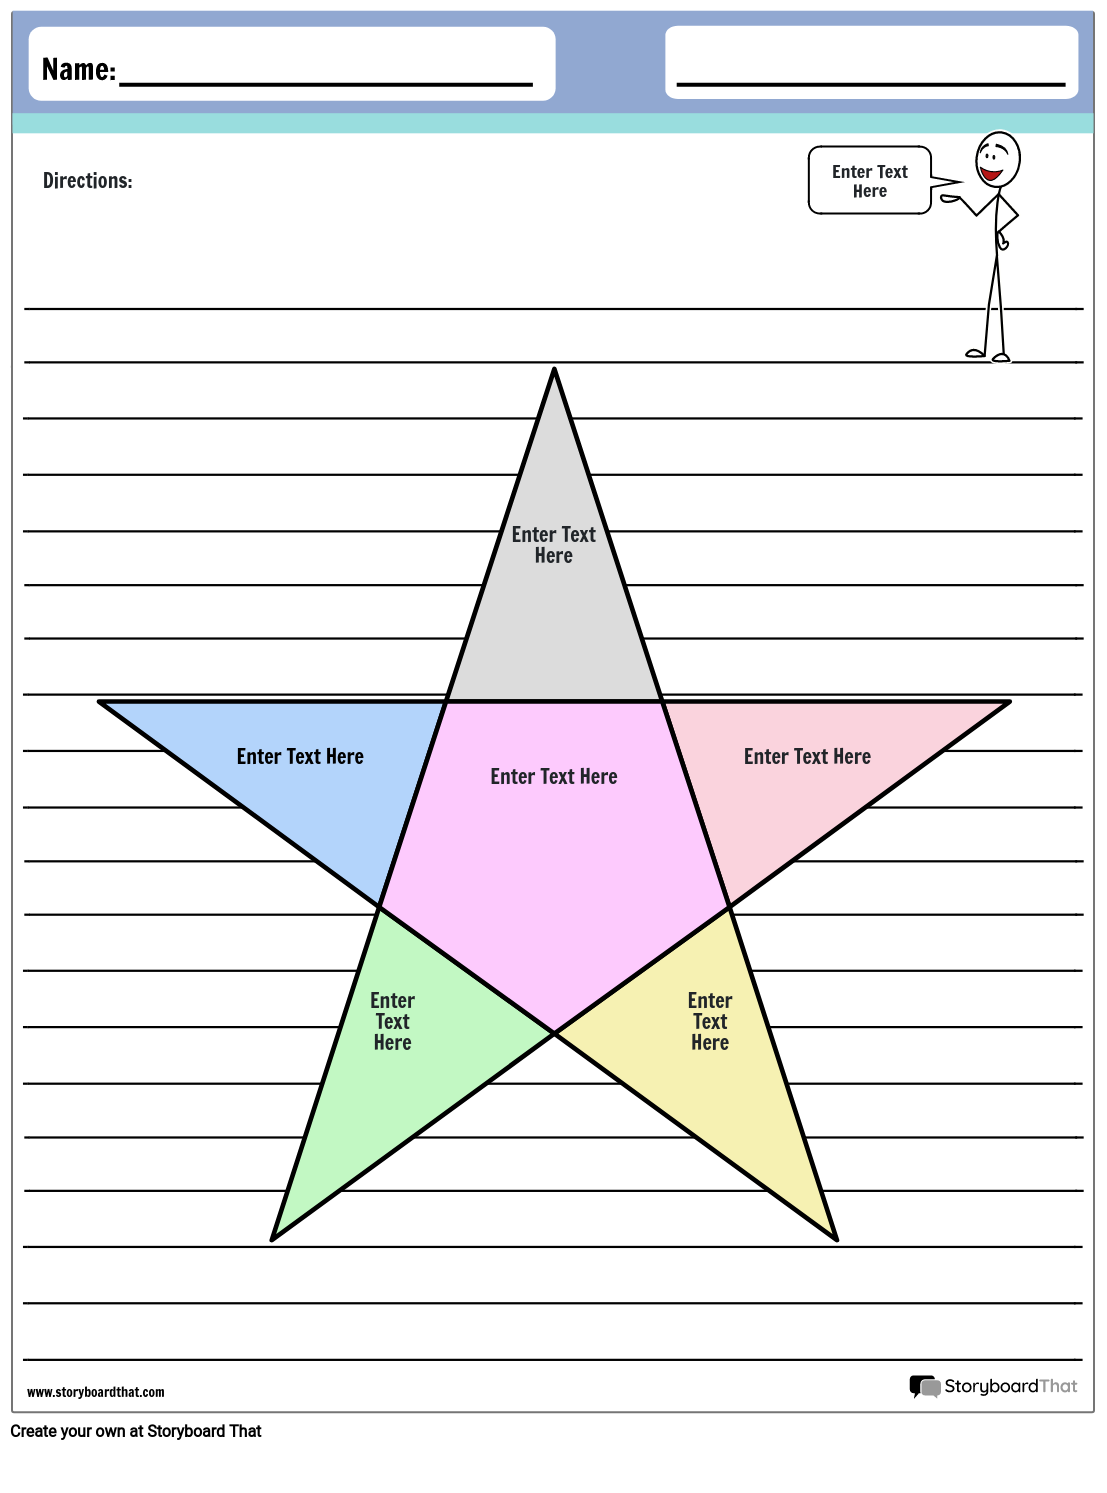 Colorful Divided Star Layout Graphic Organizer